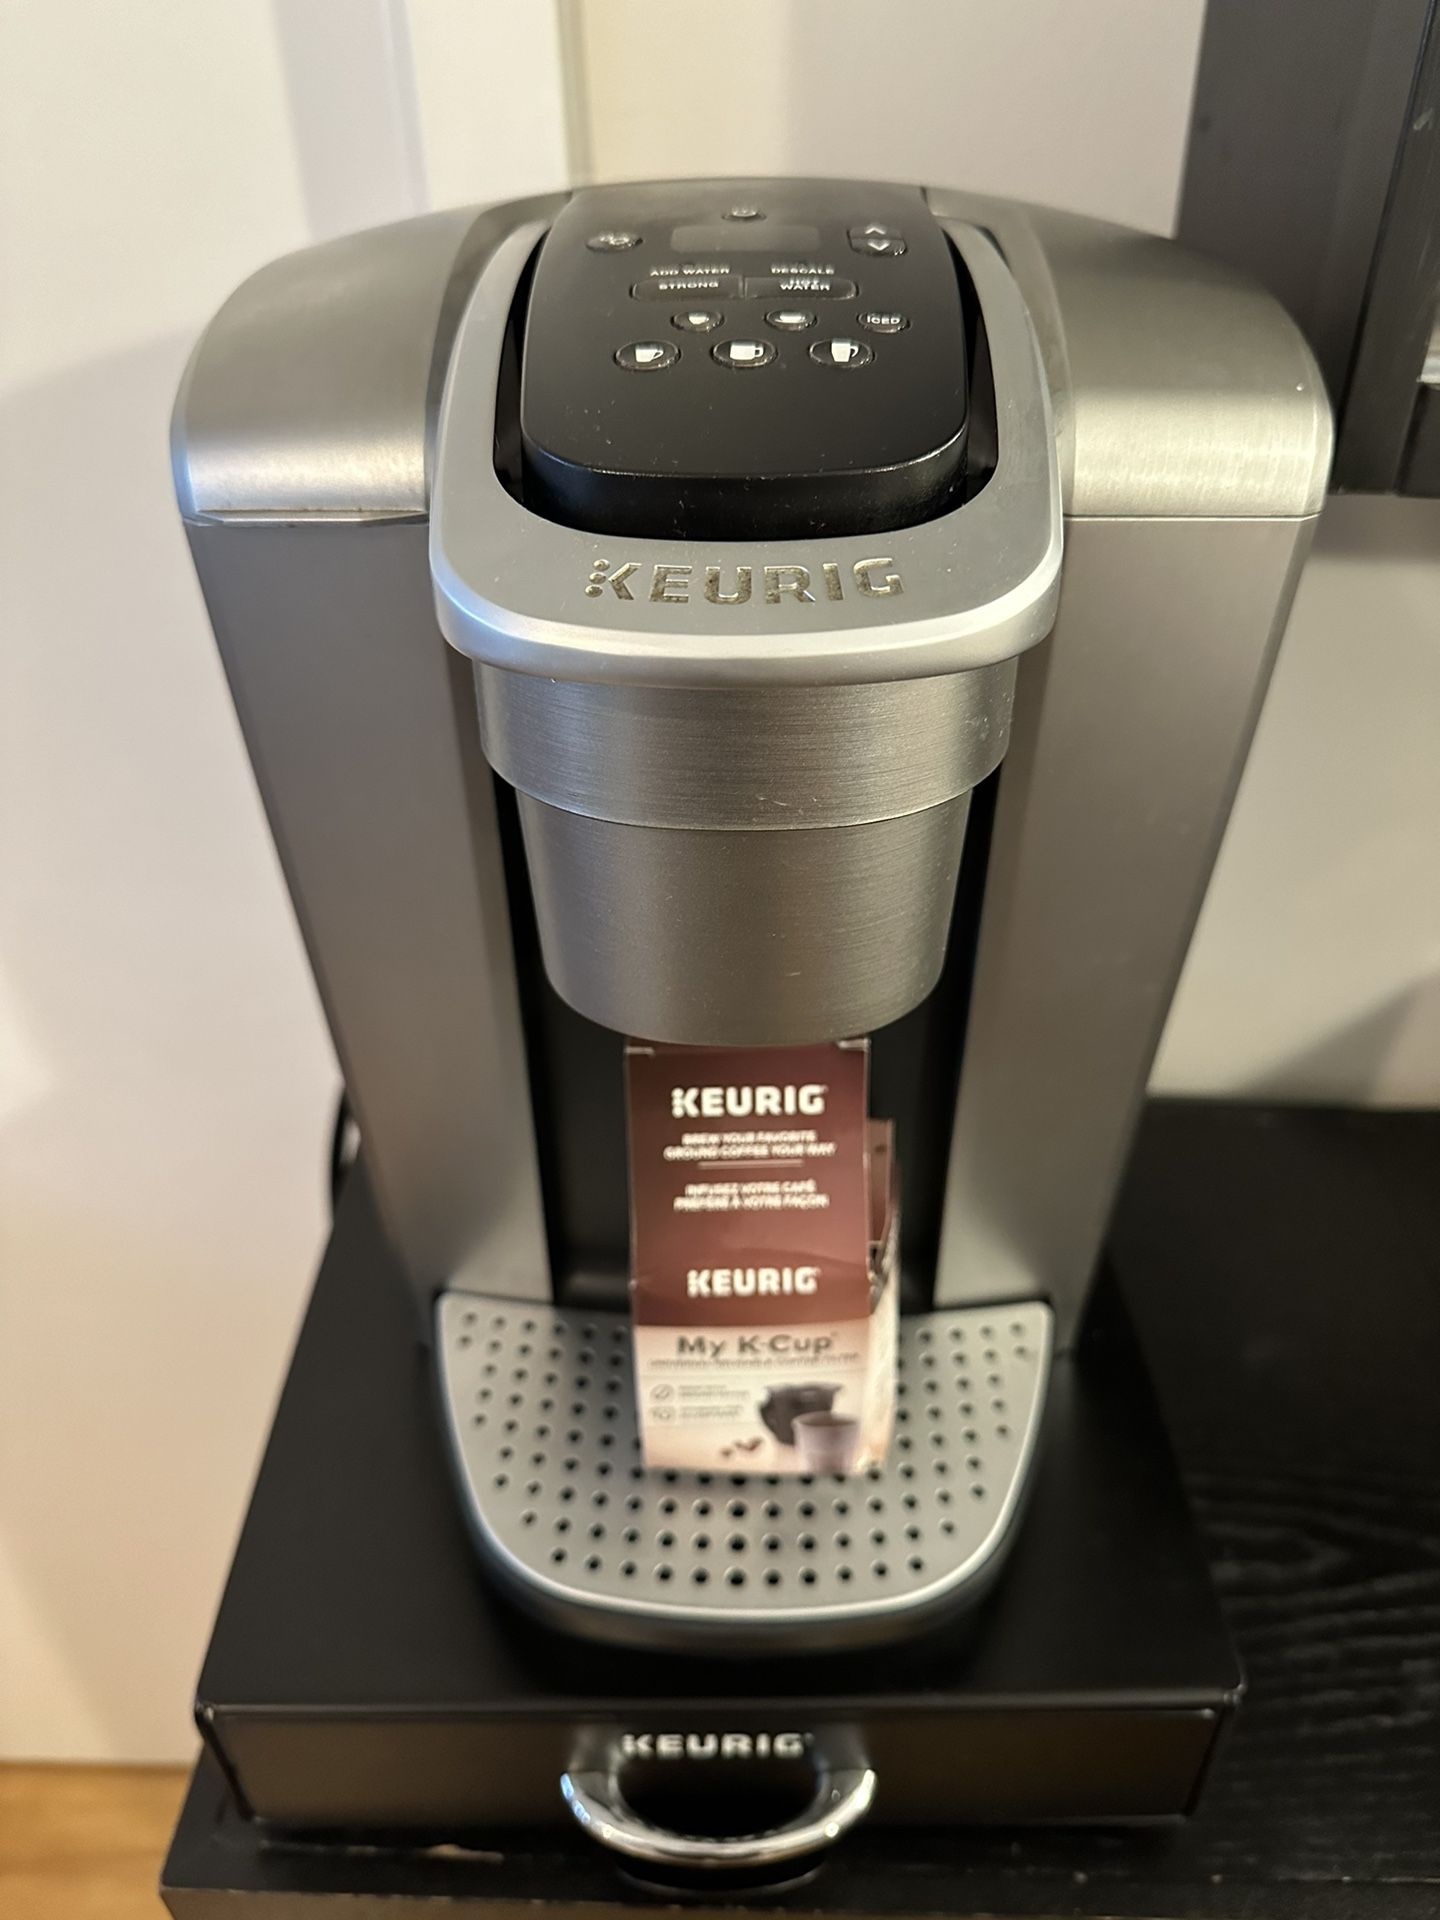 Keurig Elite Coffee Maker for Sale in Lacey, WA - OfferUp